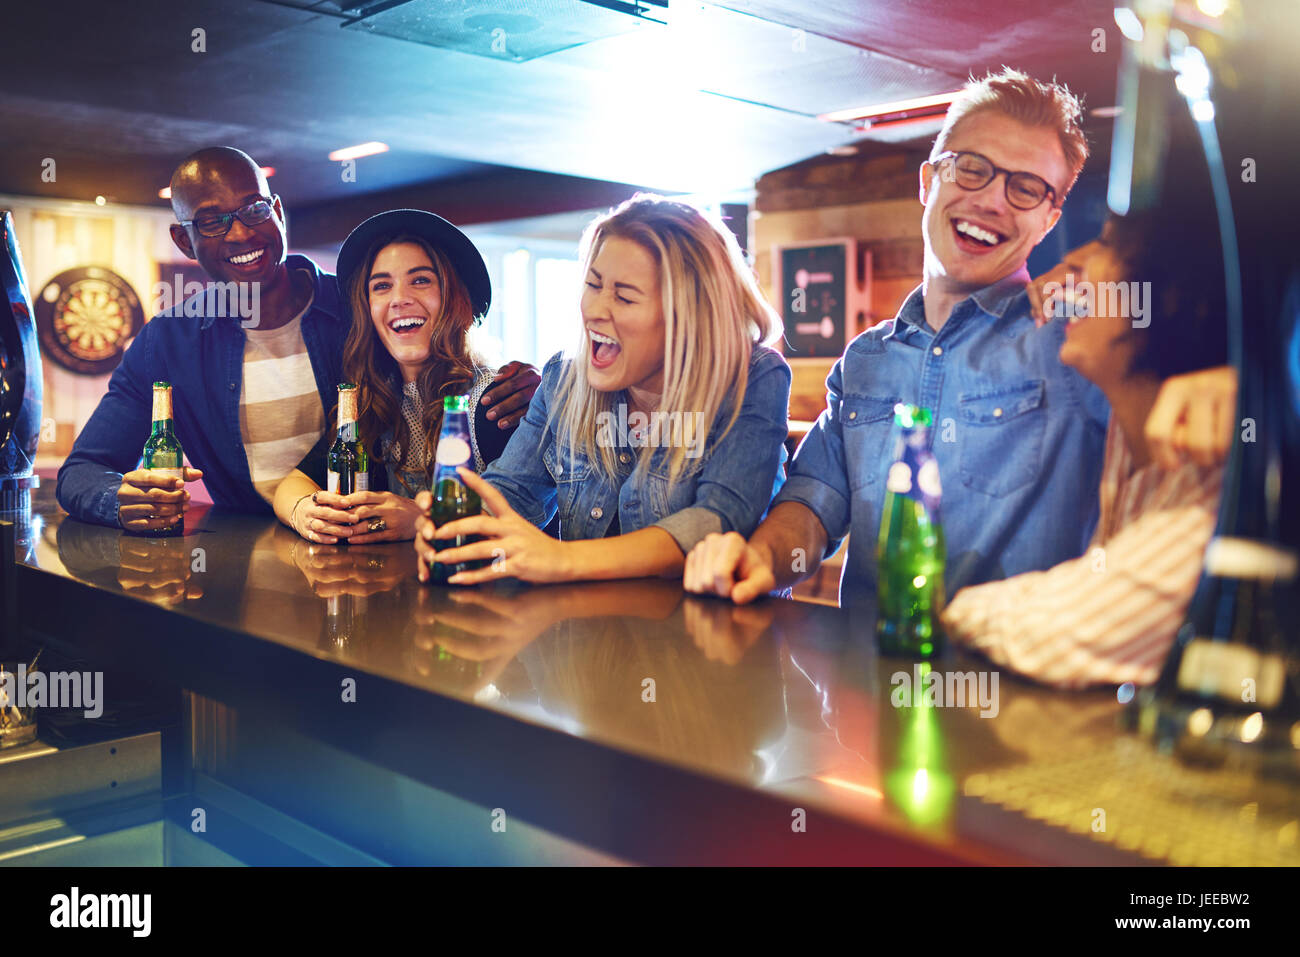 Horizontal indoors shot of laughing out loud group of people at the bar counter. Stock Photo